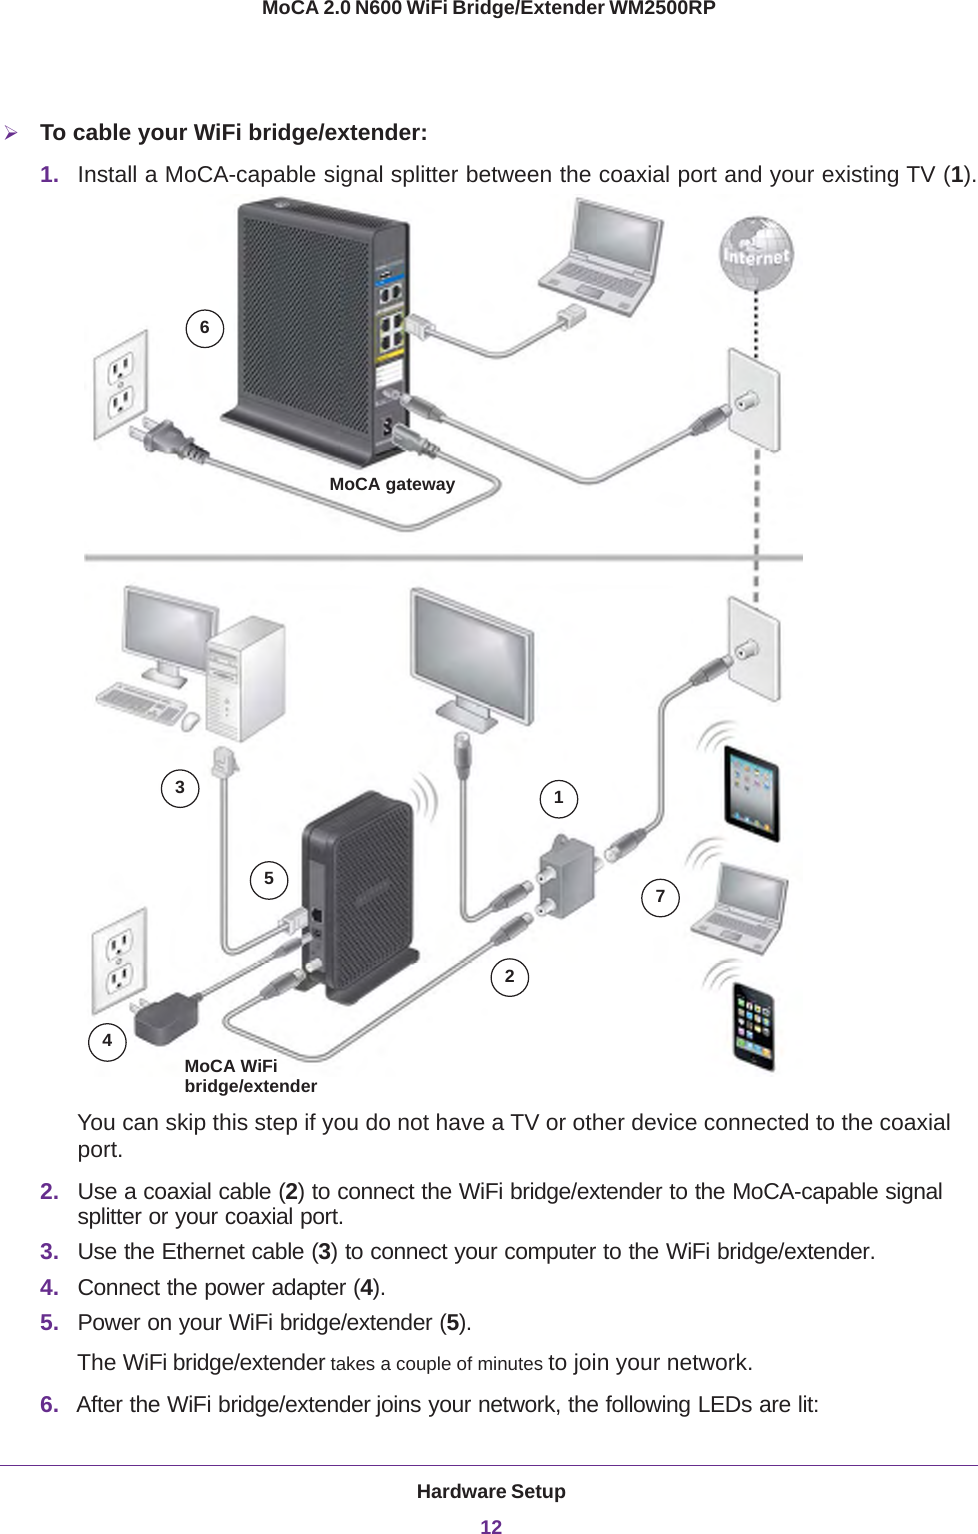 Hardware Setup12MoCA 2.0 N600 WiFi Bridge/Extender WM2500RP To cable your WiFi bridge/extender:1. Install a MoCA-capable signal splitter between the coaxial port and your existing TV (1).1 2 3 4 5  7 6 MoCA gatewayMoCA WiFibridge/extenderYou can skip this step if you do not have a TV or other device connected to the coaxial port.2. Use a coaxial cable (2) to connect the WiFi bridge/extender to the MoCA-capable signal splitter or your coaxial port.3. Use the Ethernet cable (3) to connect your computer to the WiFi bridge/extender.4. Connect the power adapter (4).5. Power on your WiFi bridge/extender (5).The WiFi bridge/extender takes a couple of minutes to join your network.6. After the WiFi bridge/extender joins your network, the following LEDs are lit: